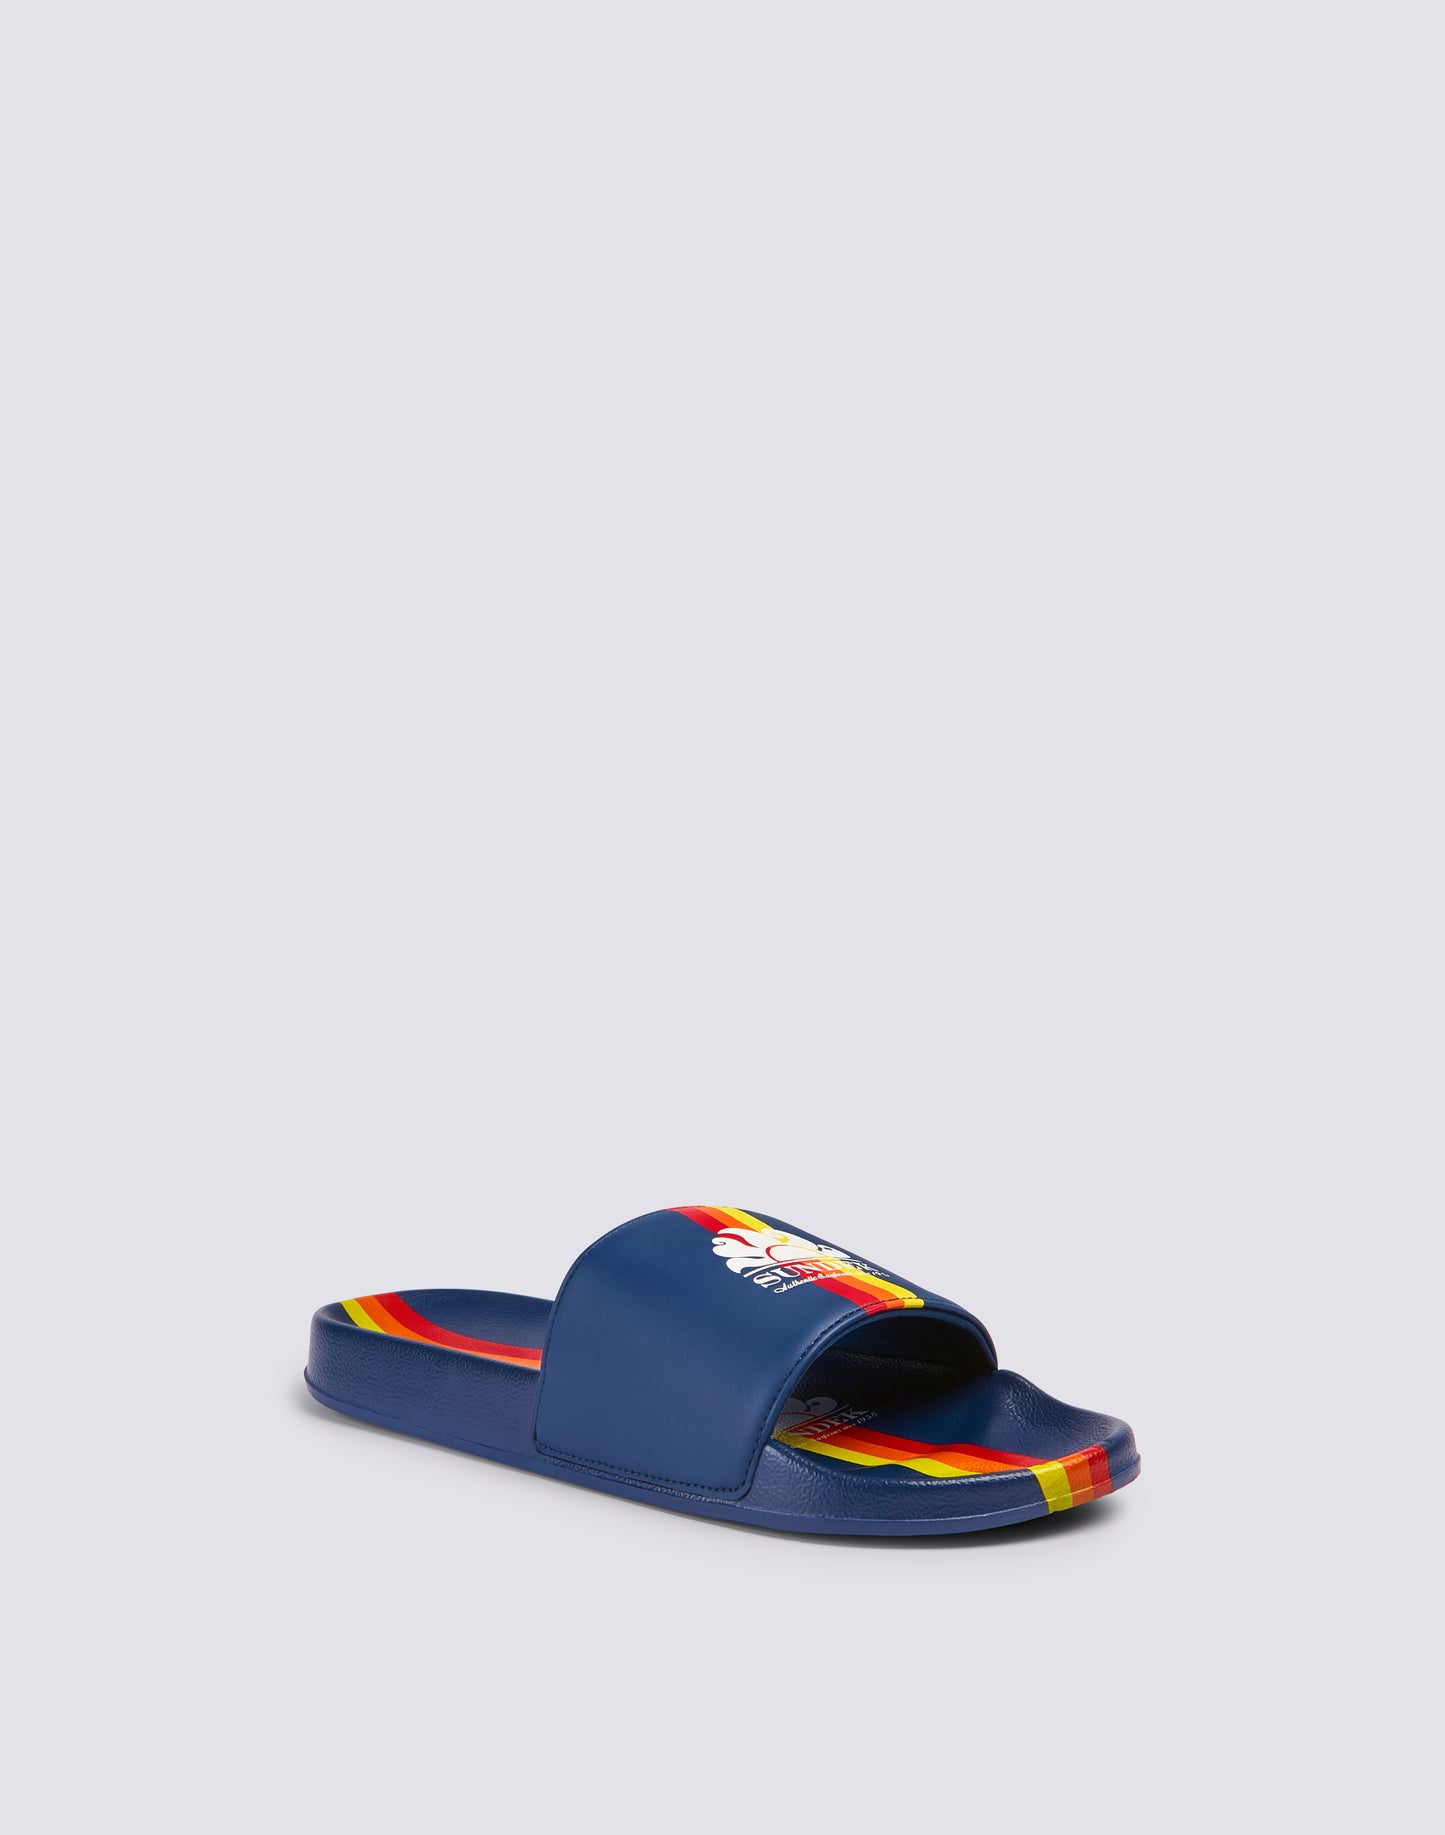 BAND SLIPPERS WITH LOGO AND RAINBOW DETAIL